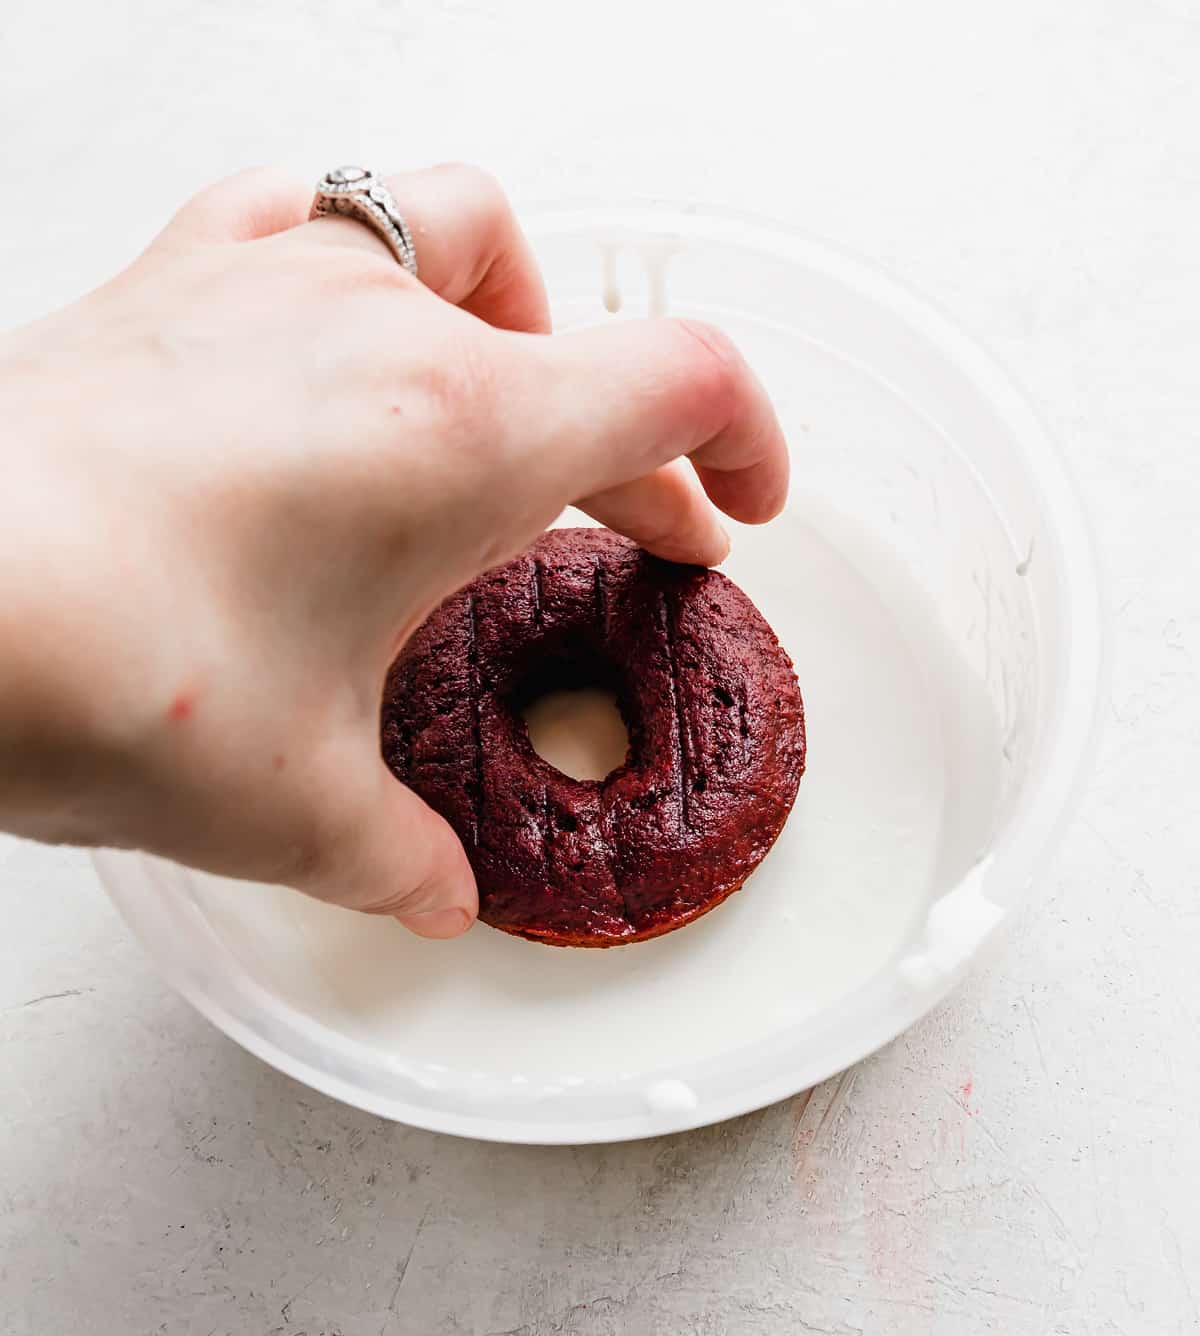 A hand dipping a red velvet donut in a white chocolate glaze.